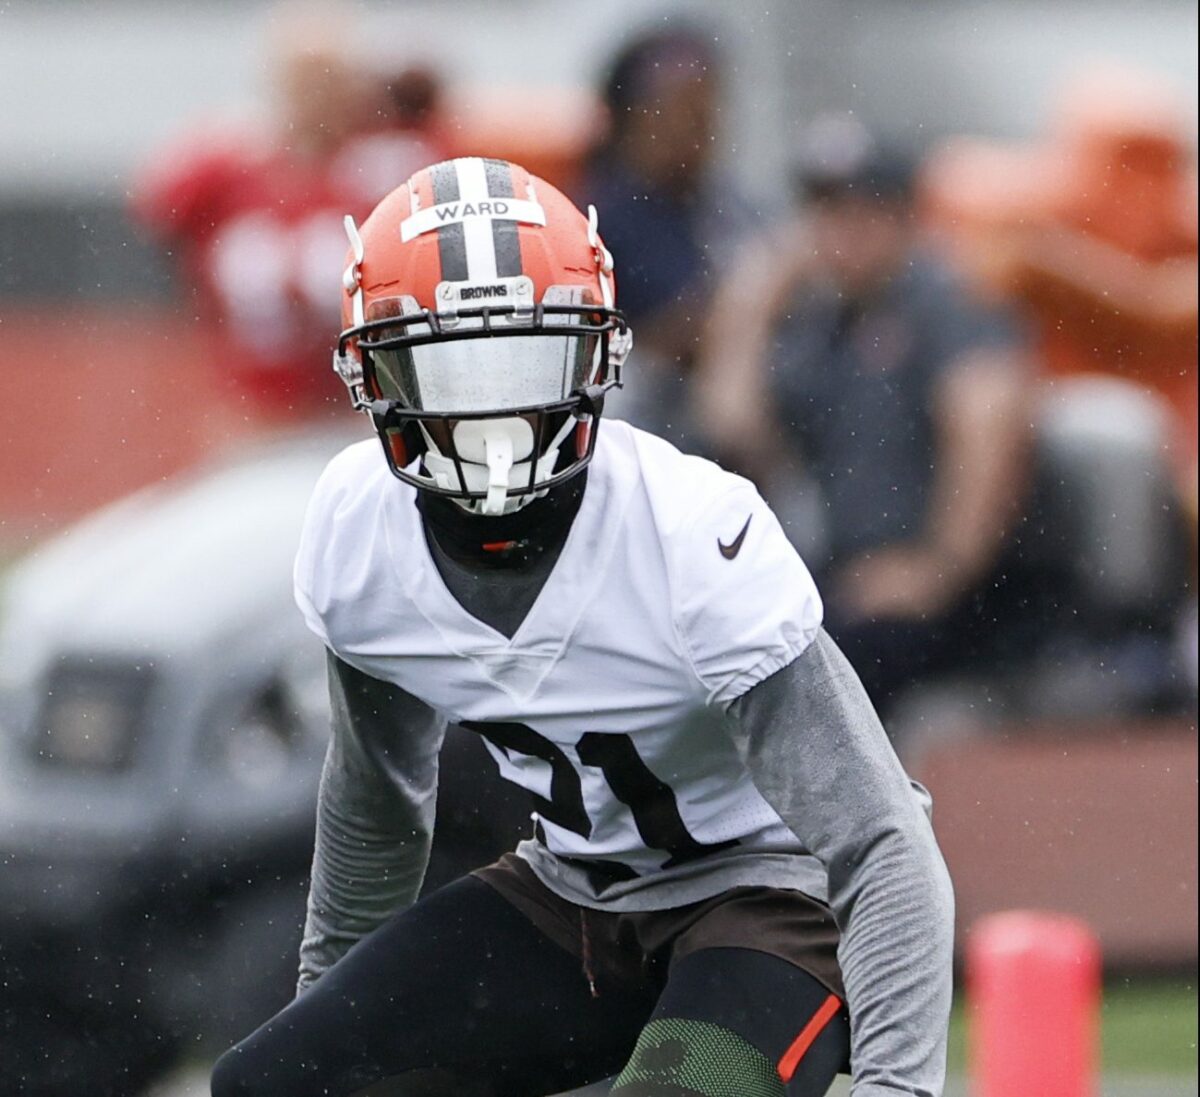 Browns make flurry of moves ahead of training camp opening